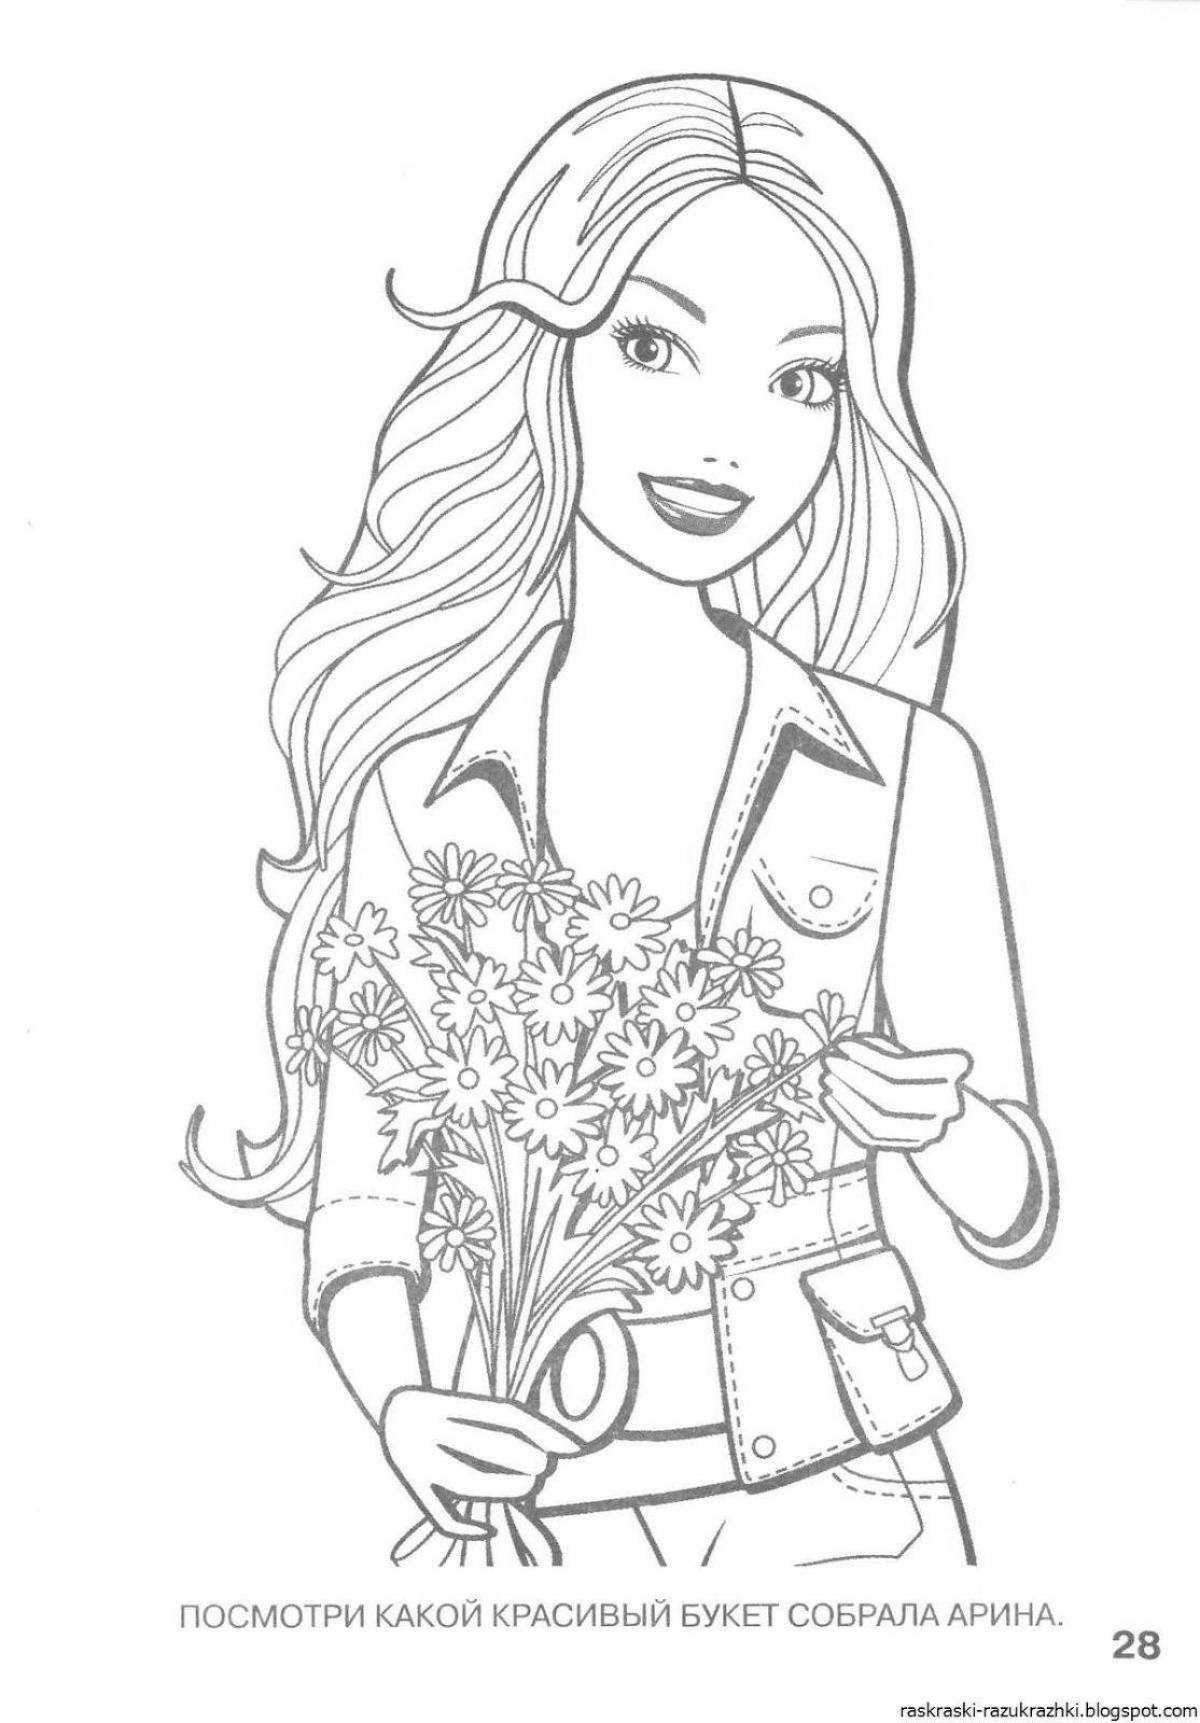 18 year old playful coloring page